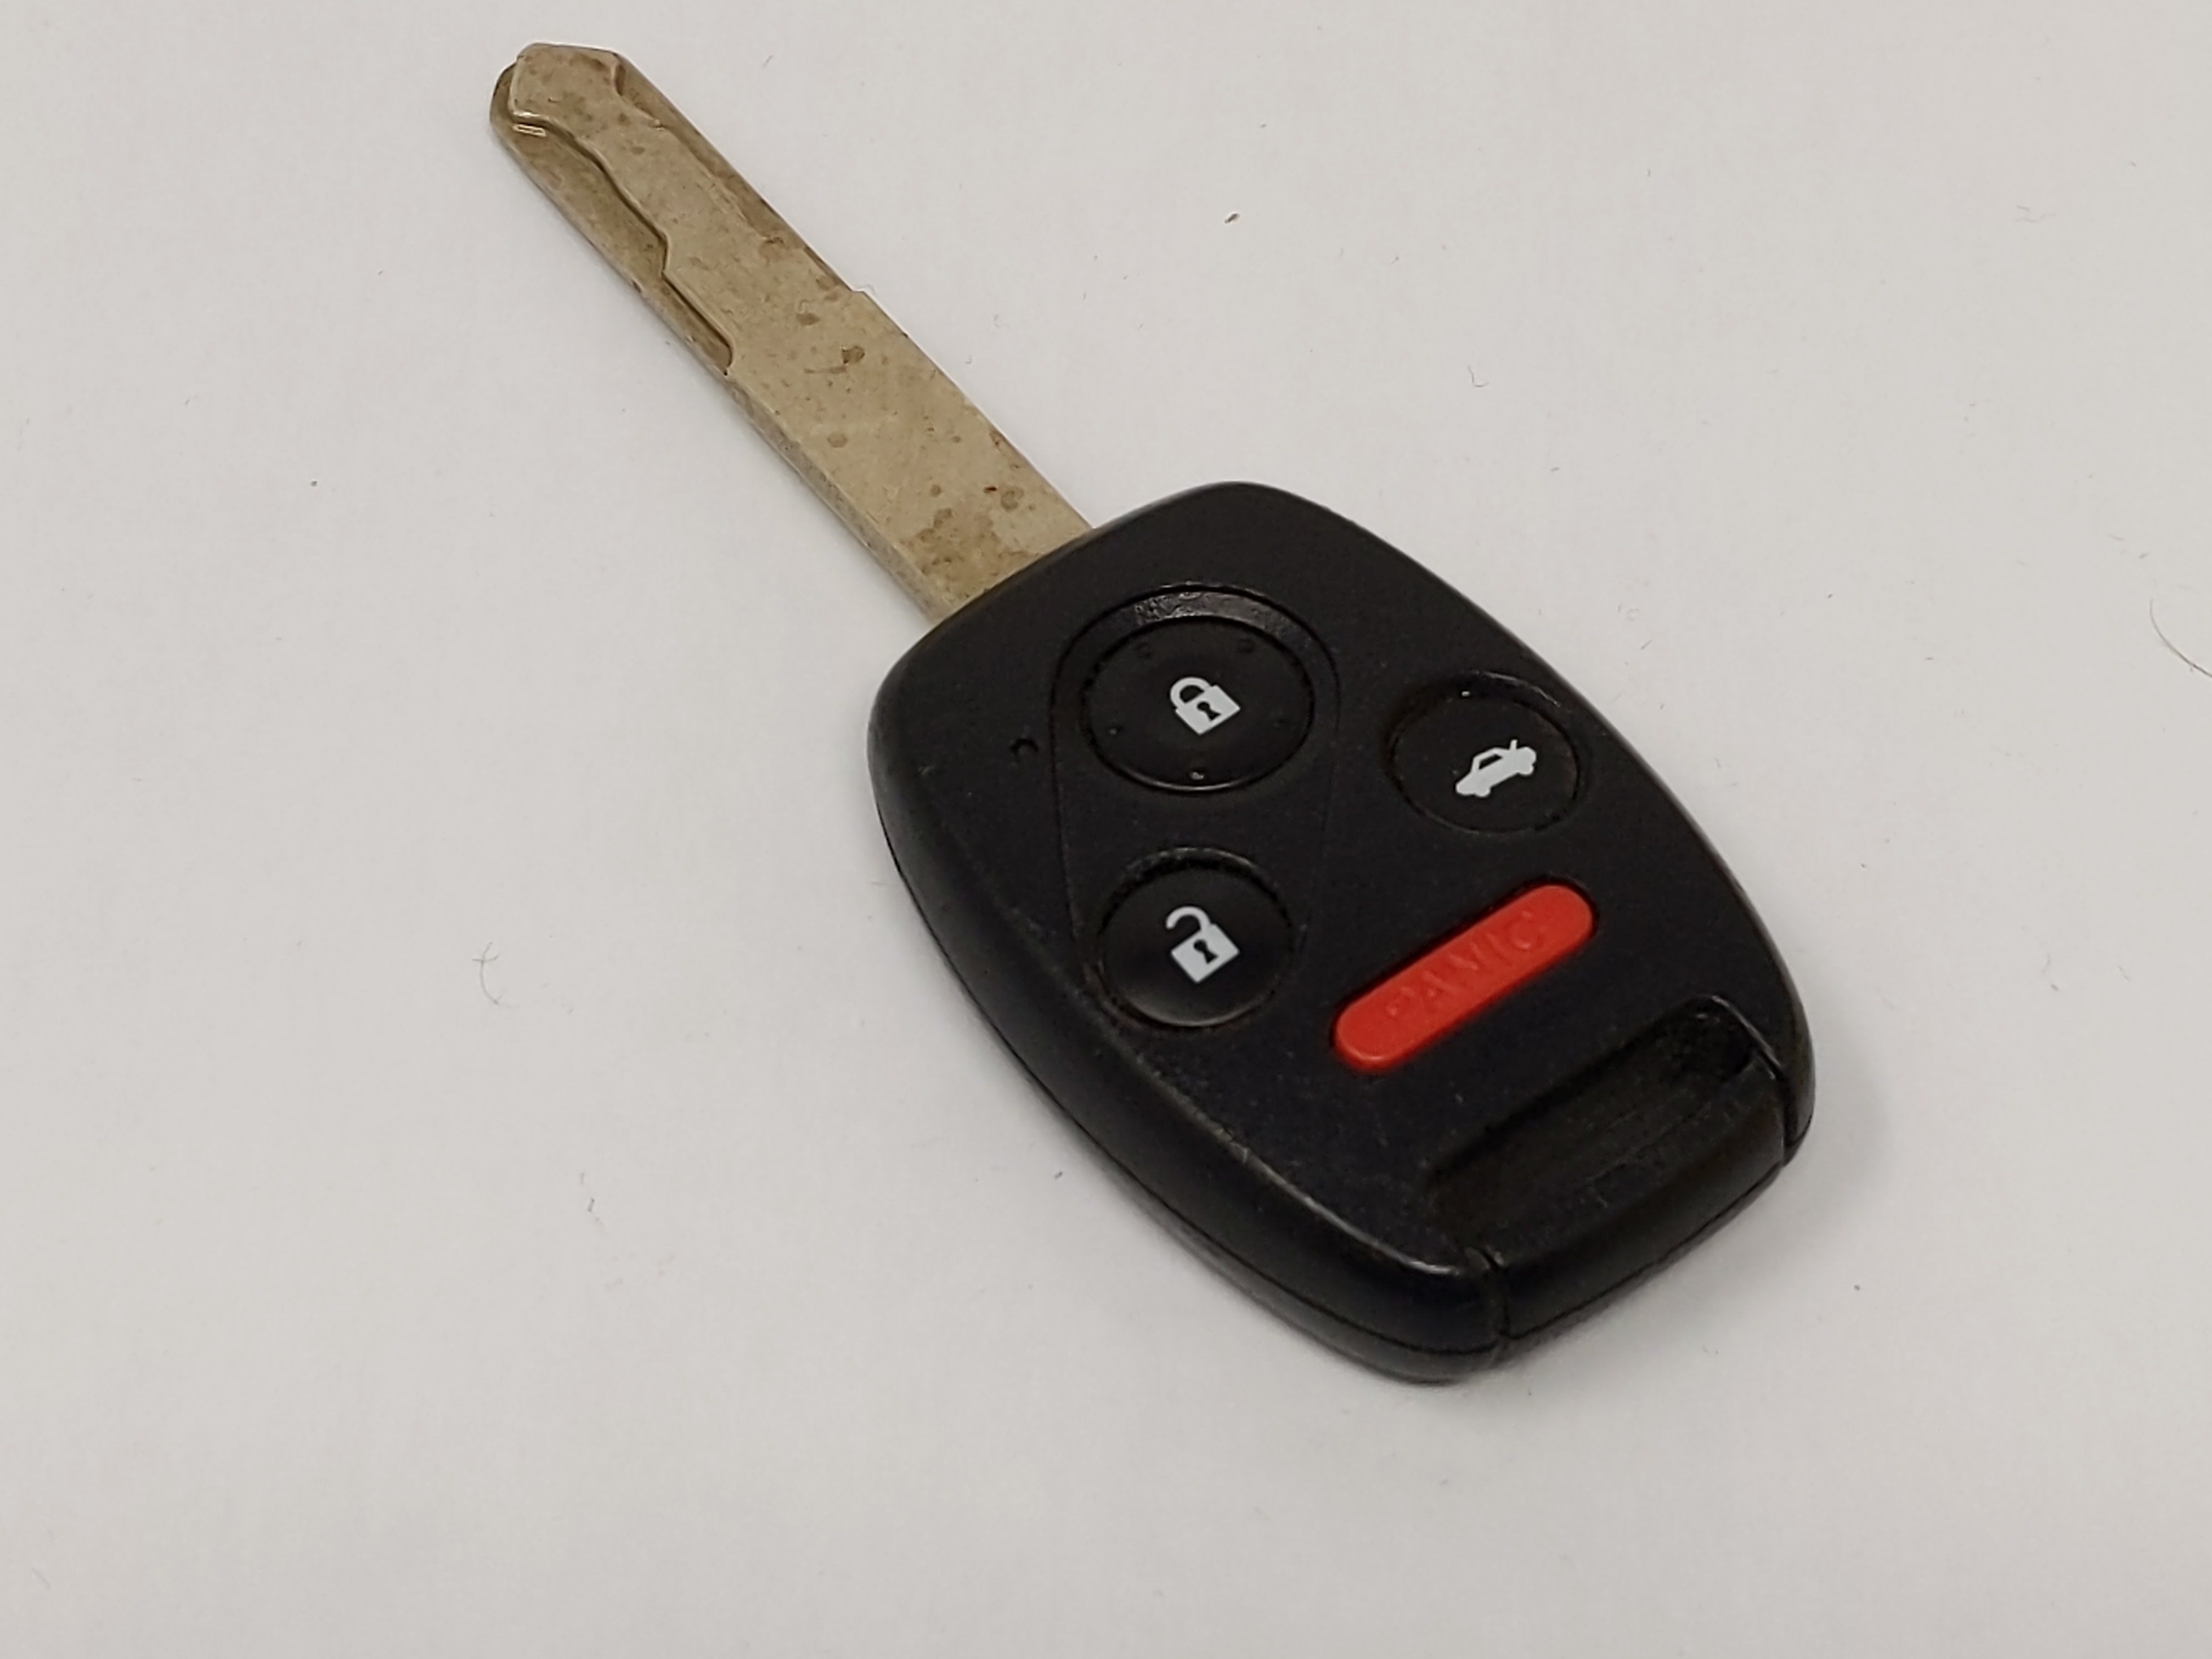 2003-2007 Honda Accord Keyless Entry Remote Oucg8d-380h-A 4 Buttons Car - Oemusedautoparts1.com